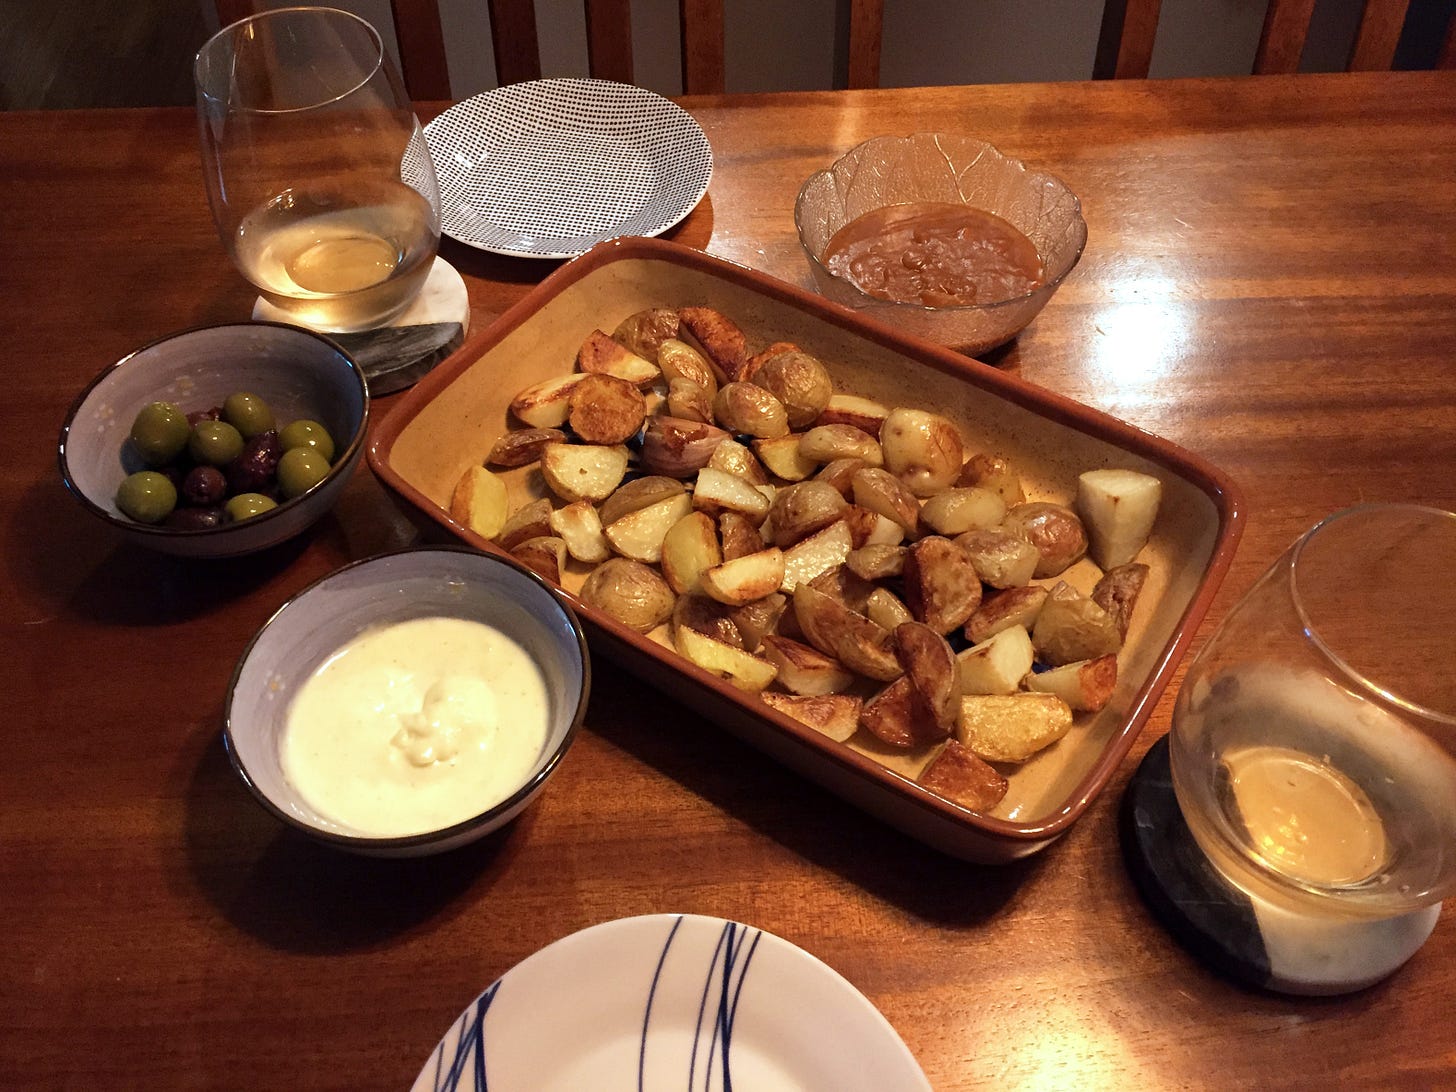 A shallow rectangular dish full of browned wedges of potato, surrounded by smaller dishes with olives, garlic mayo, and salsa brava. Two glasses of rosé wine sit on coasters next to two small empty plates.